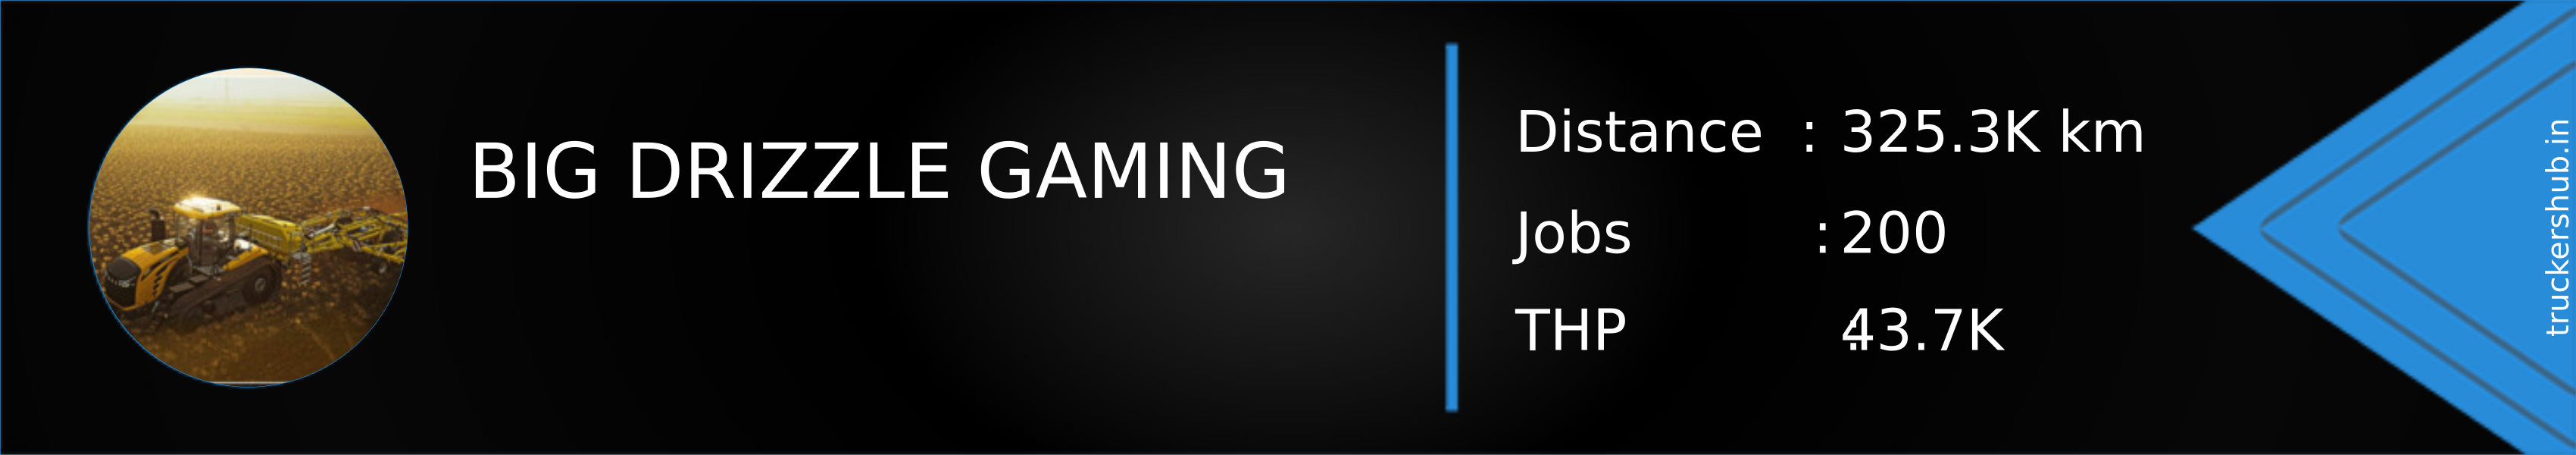 BIG DRIZZLE GAMING Banner